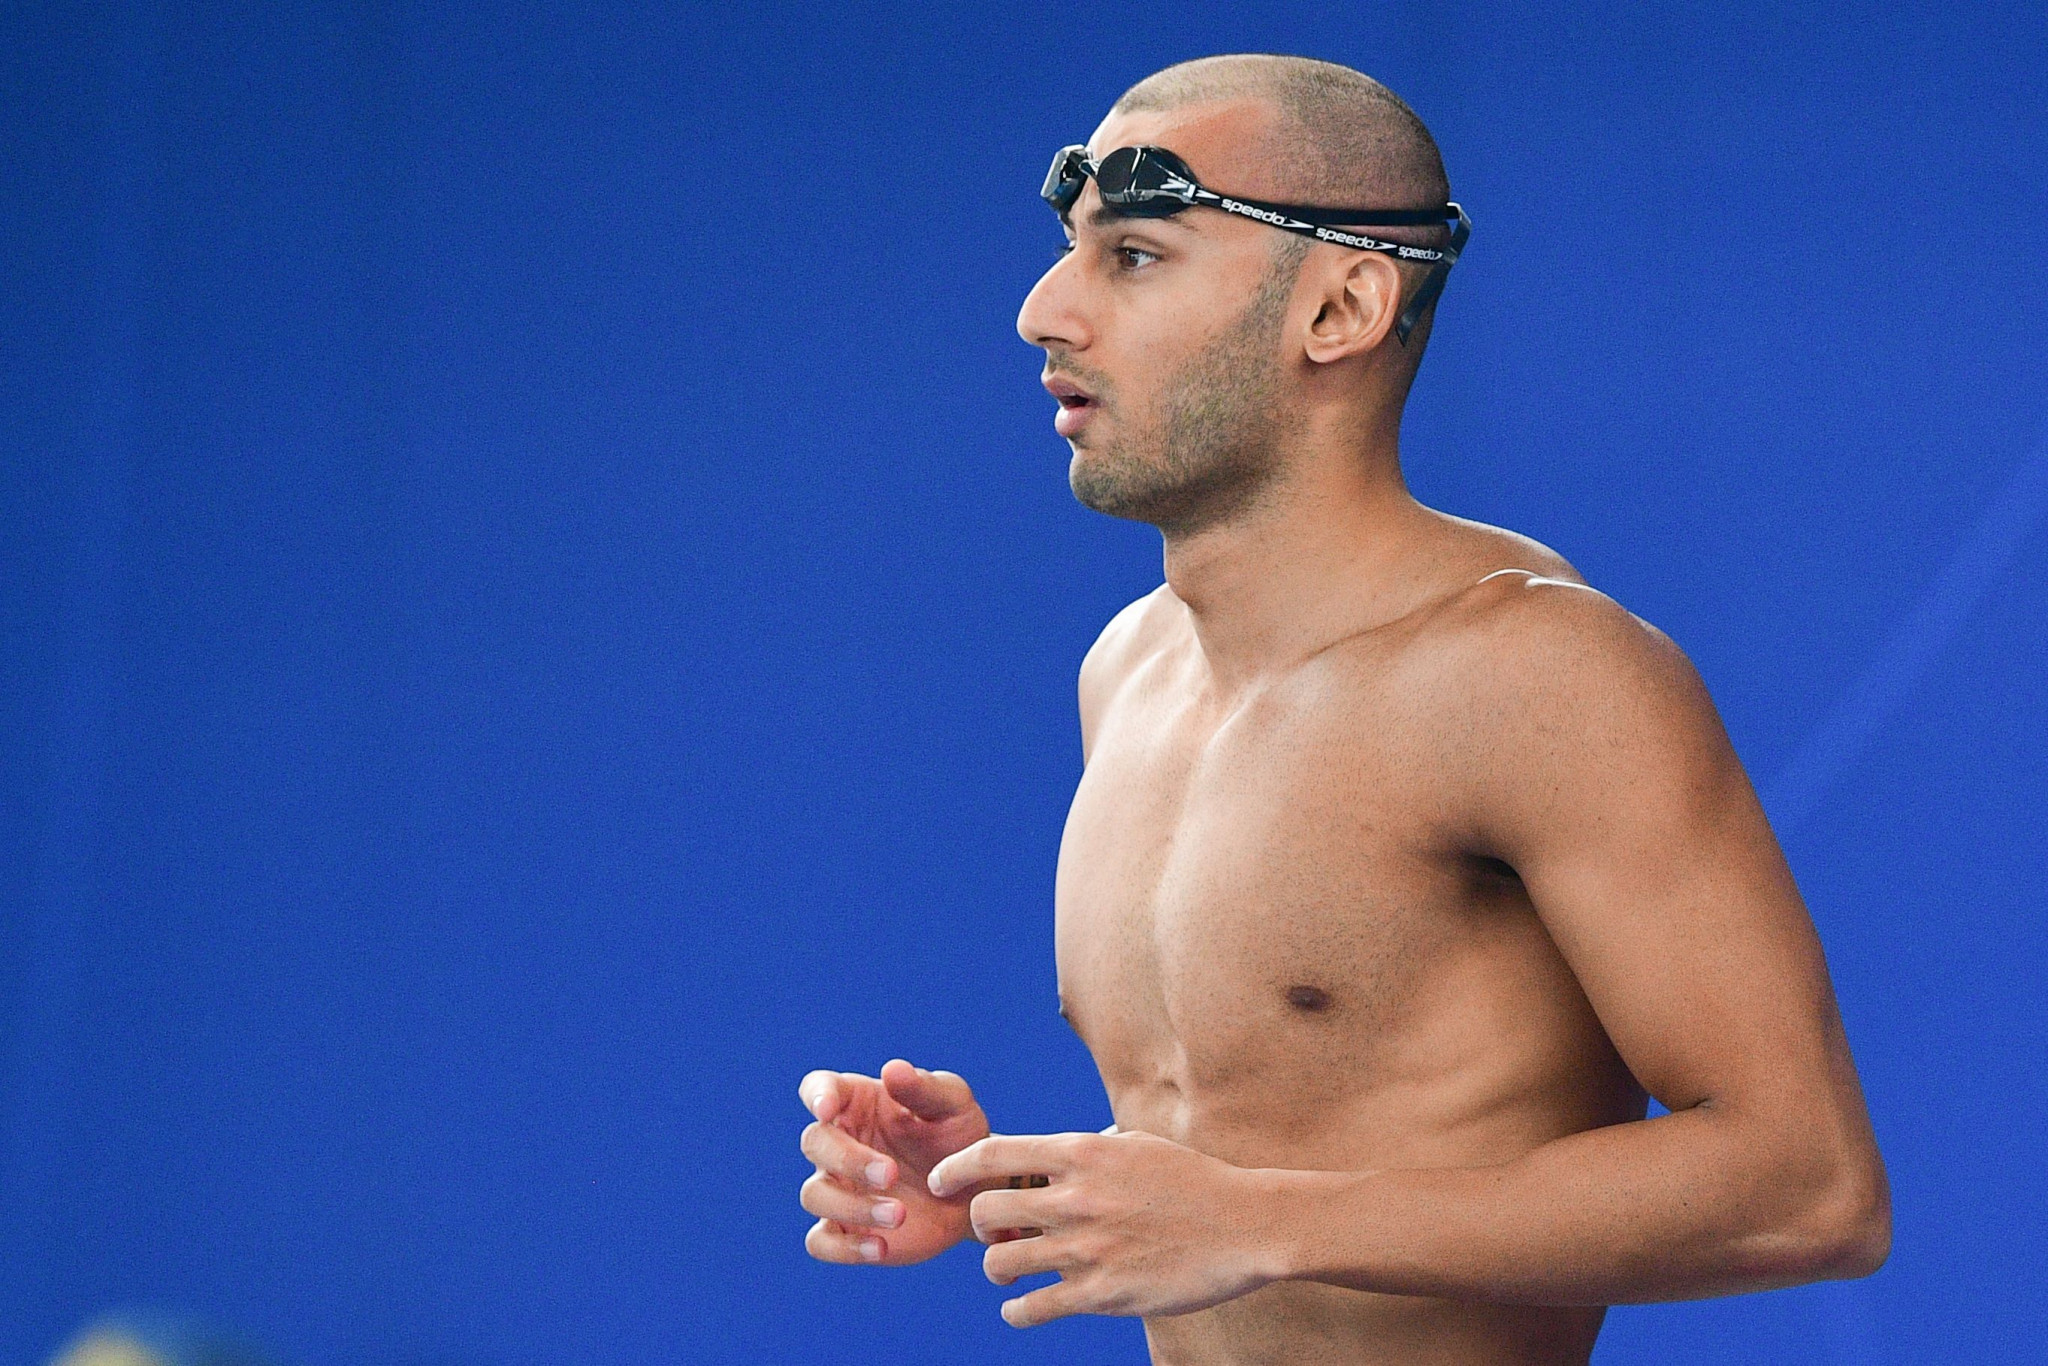 Virdhawal Khade has expressed frustration at swimming pools remaining closed in India ©Getty Images